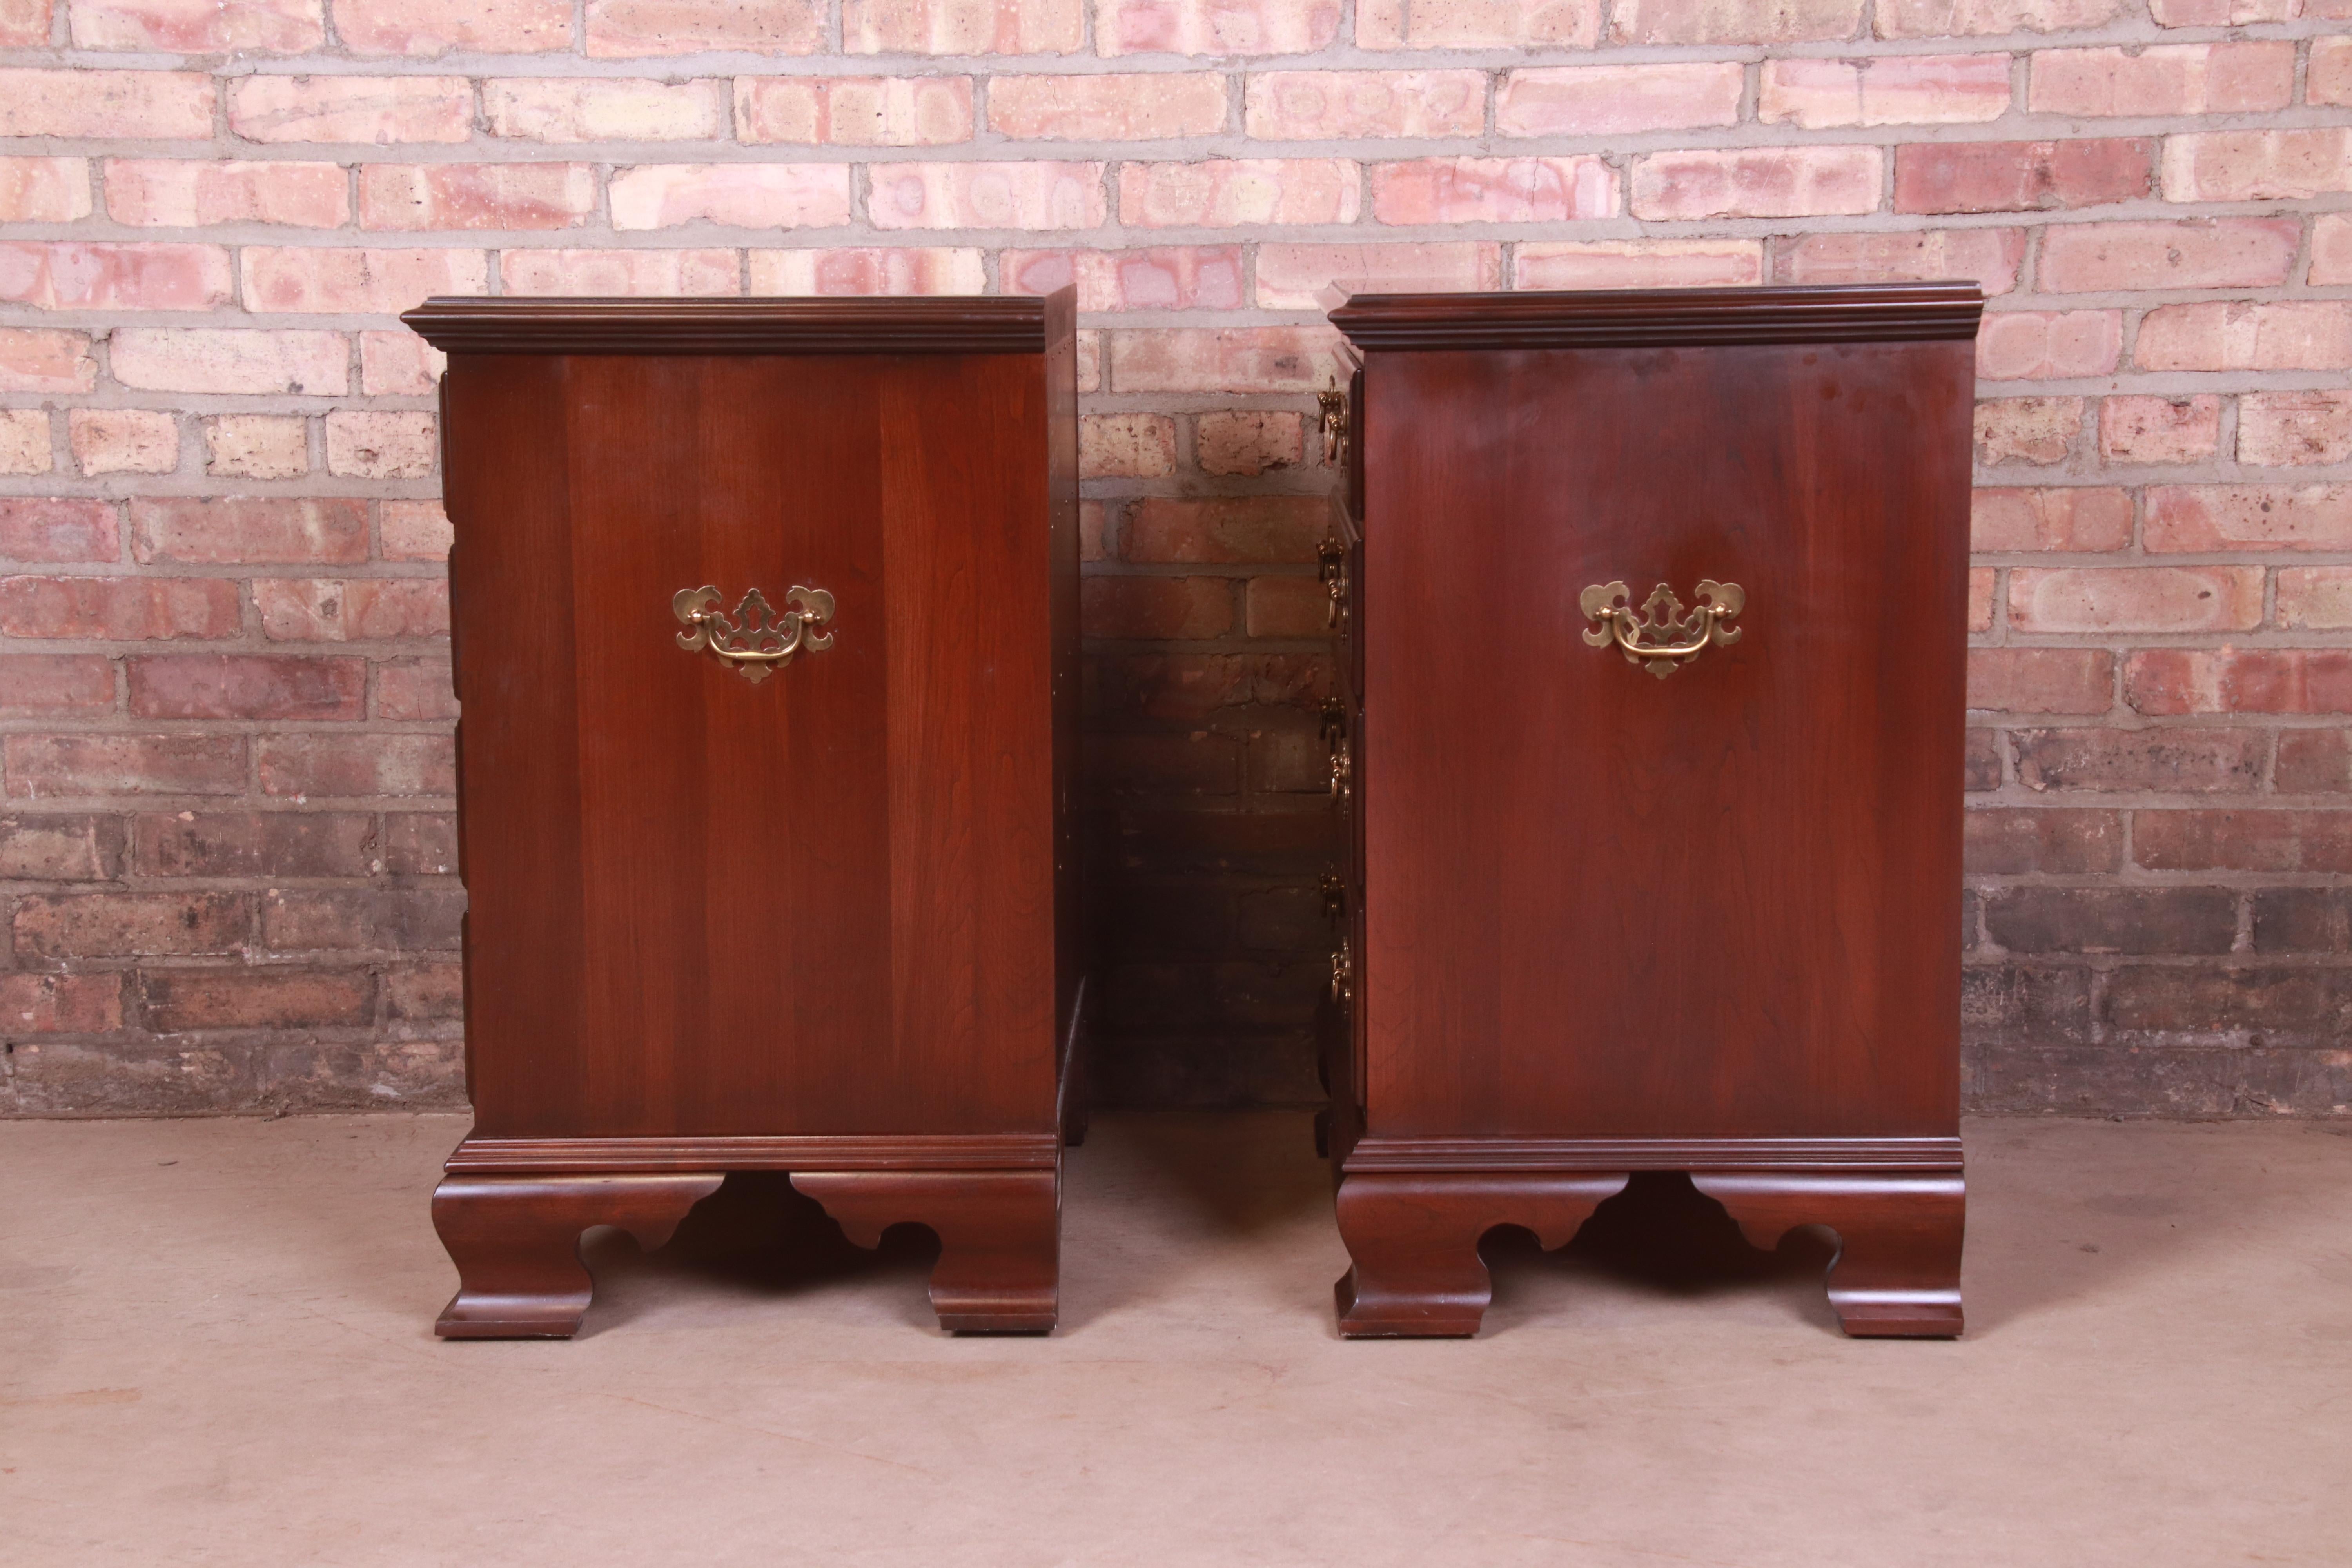 Ethan Allen Georgian Mahogany Four-Drawer Bedside Chests, Pair 9